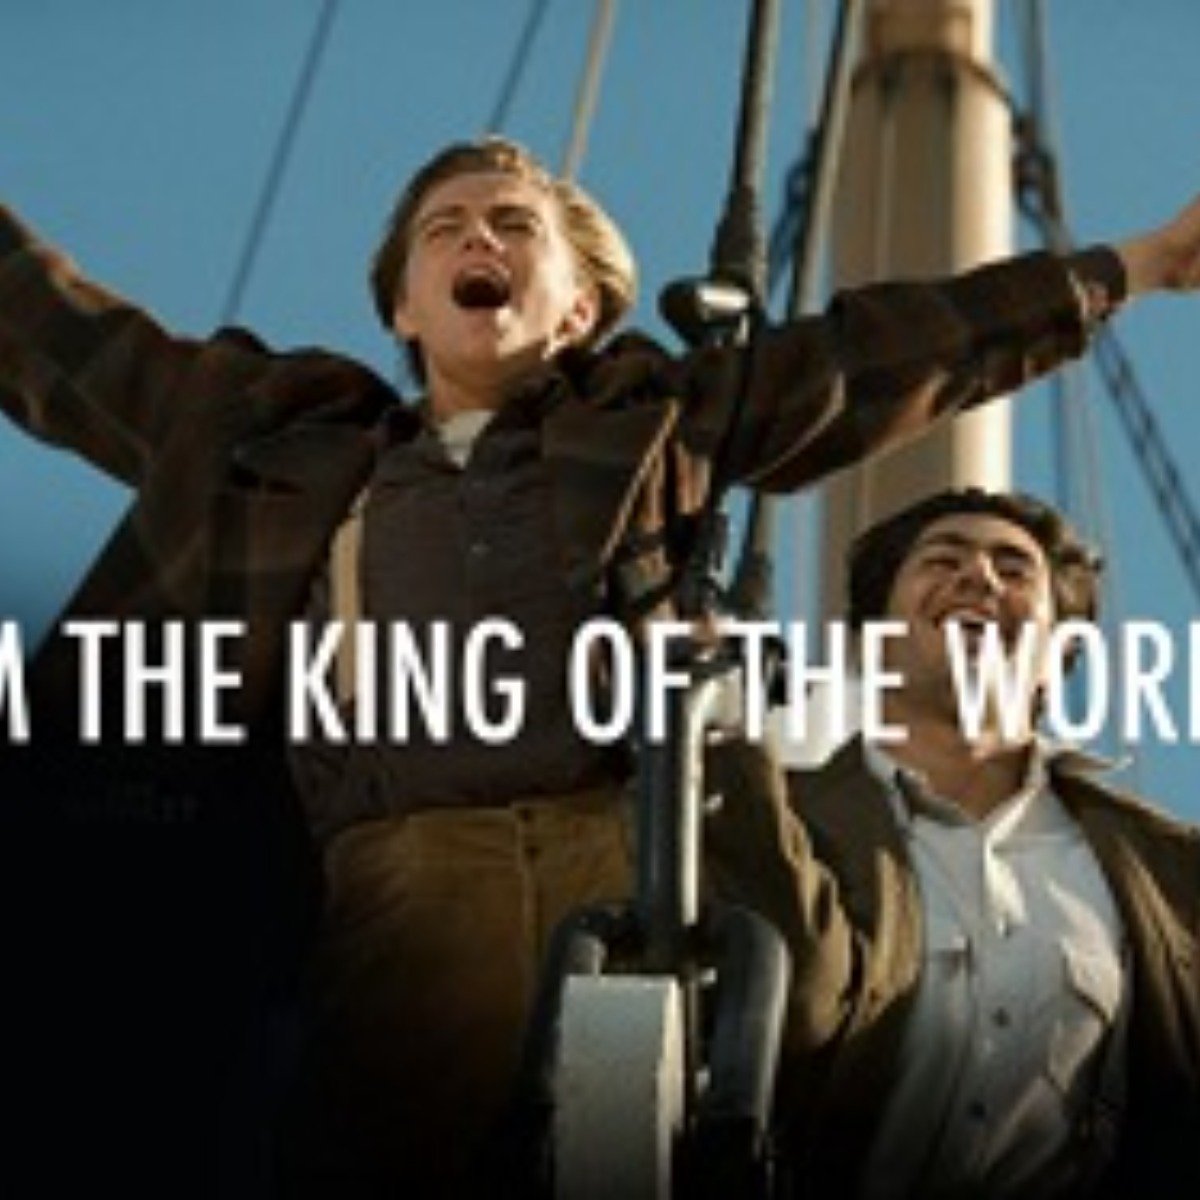 I am the greatest. I'm the king of the world!